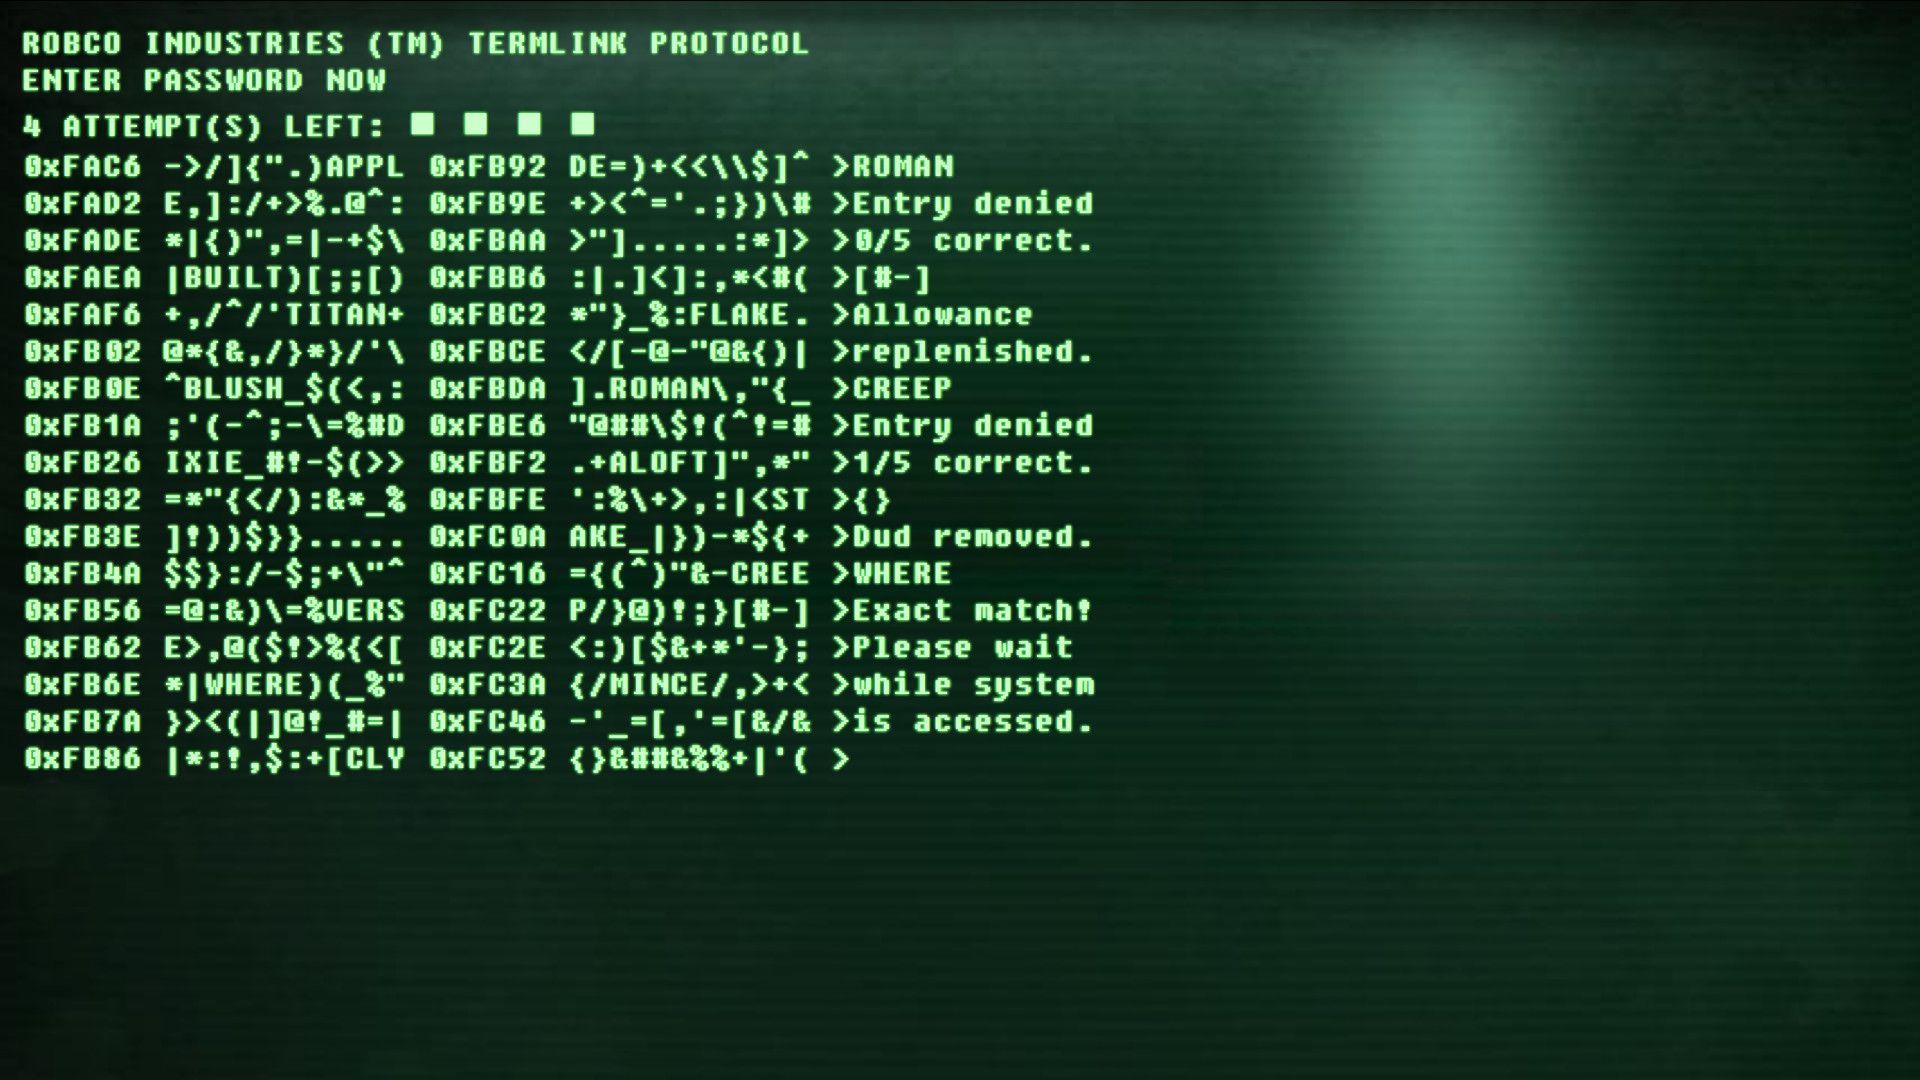 The Terminal Wallpapers